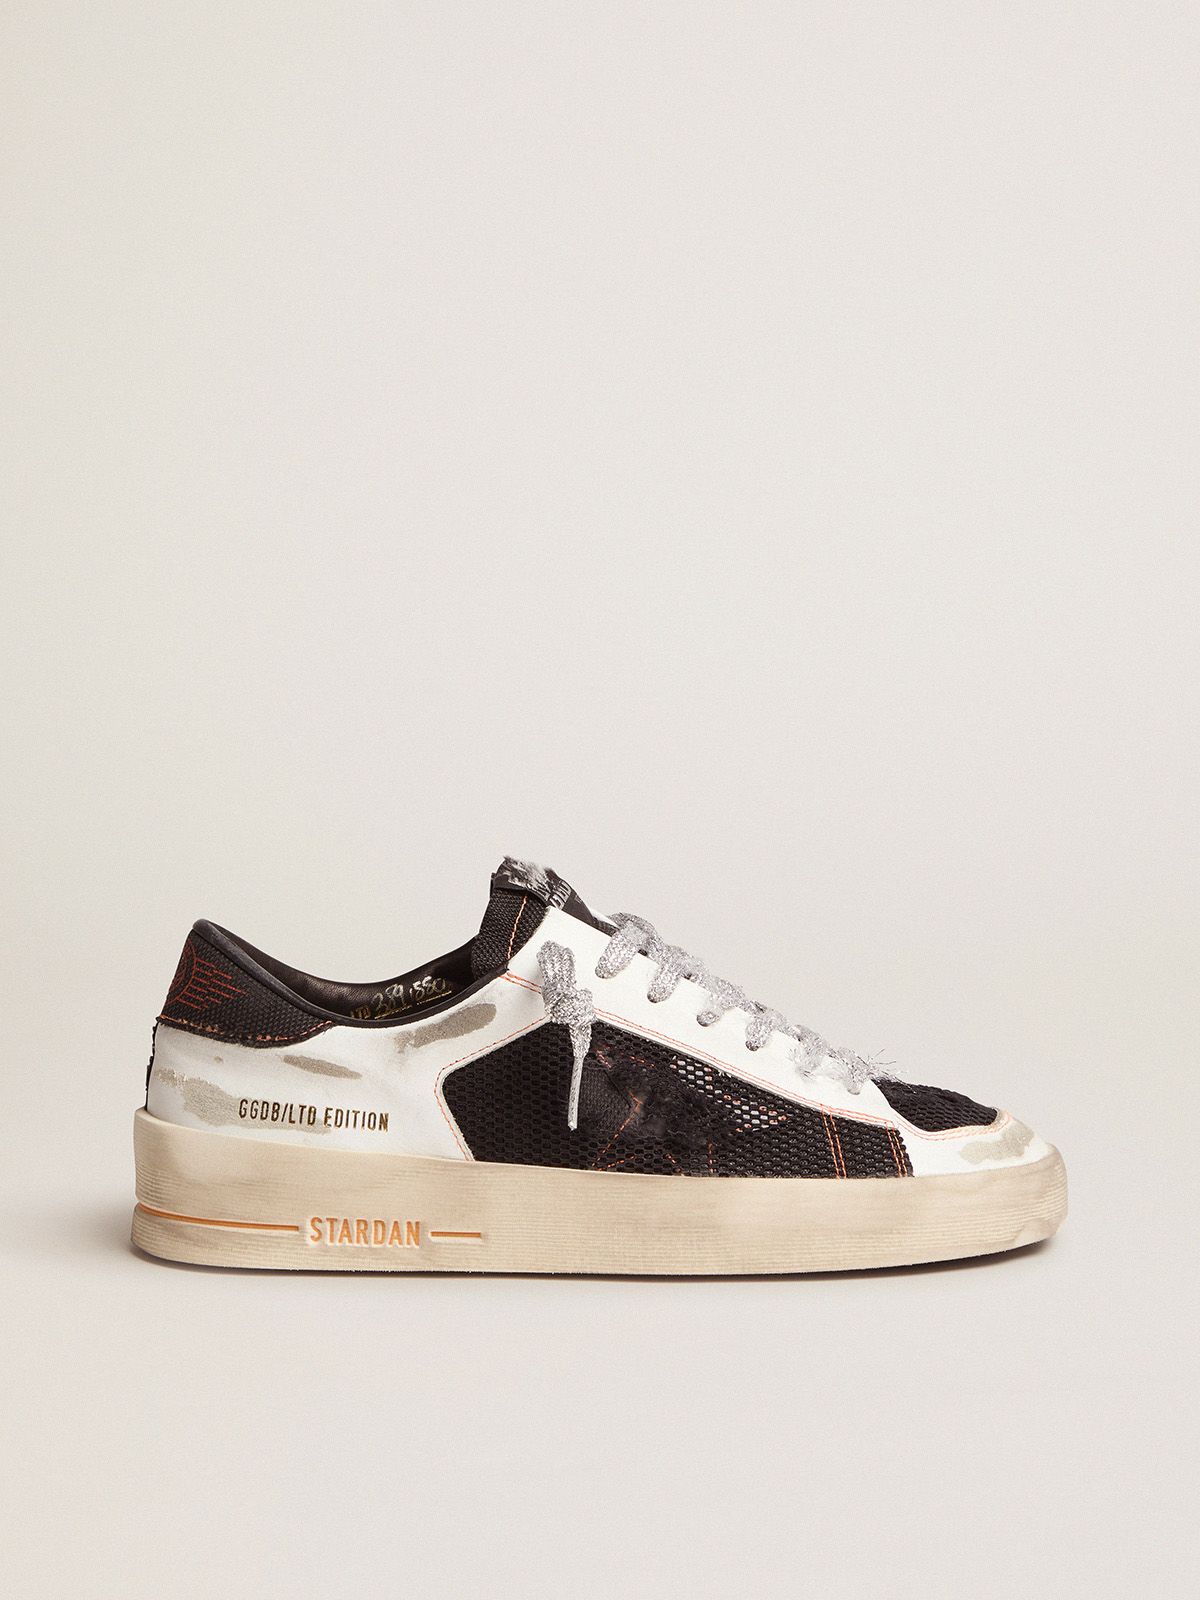 golden goose laces Limited White Edition LAB sneakers with silver Stardan